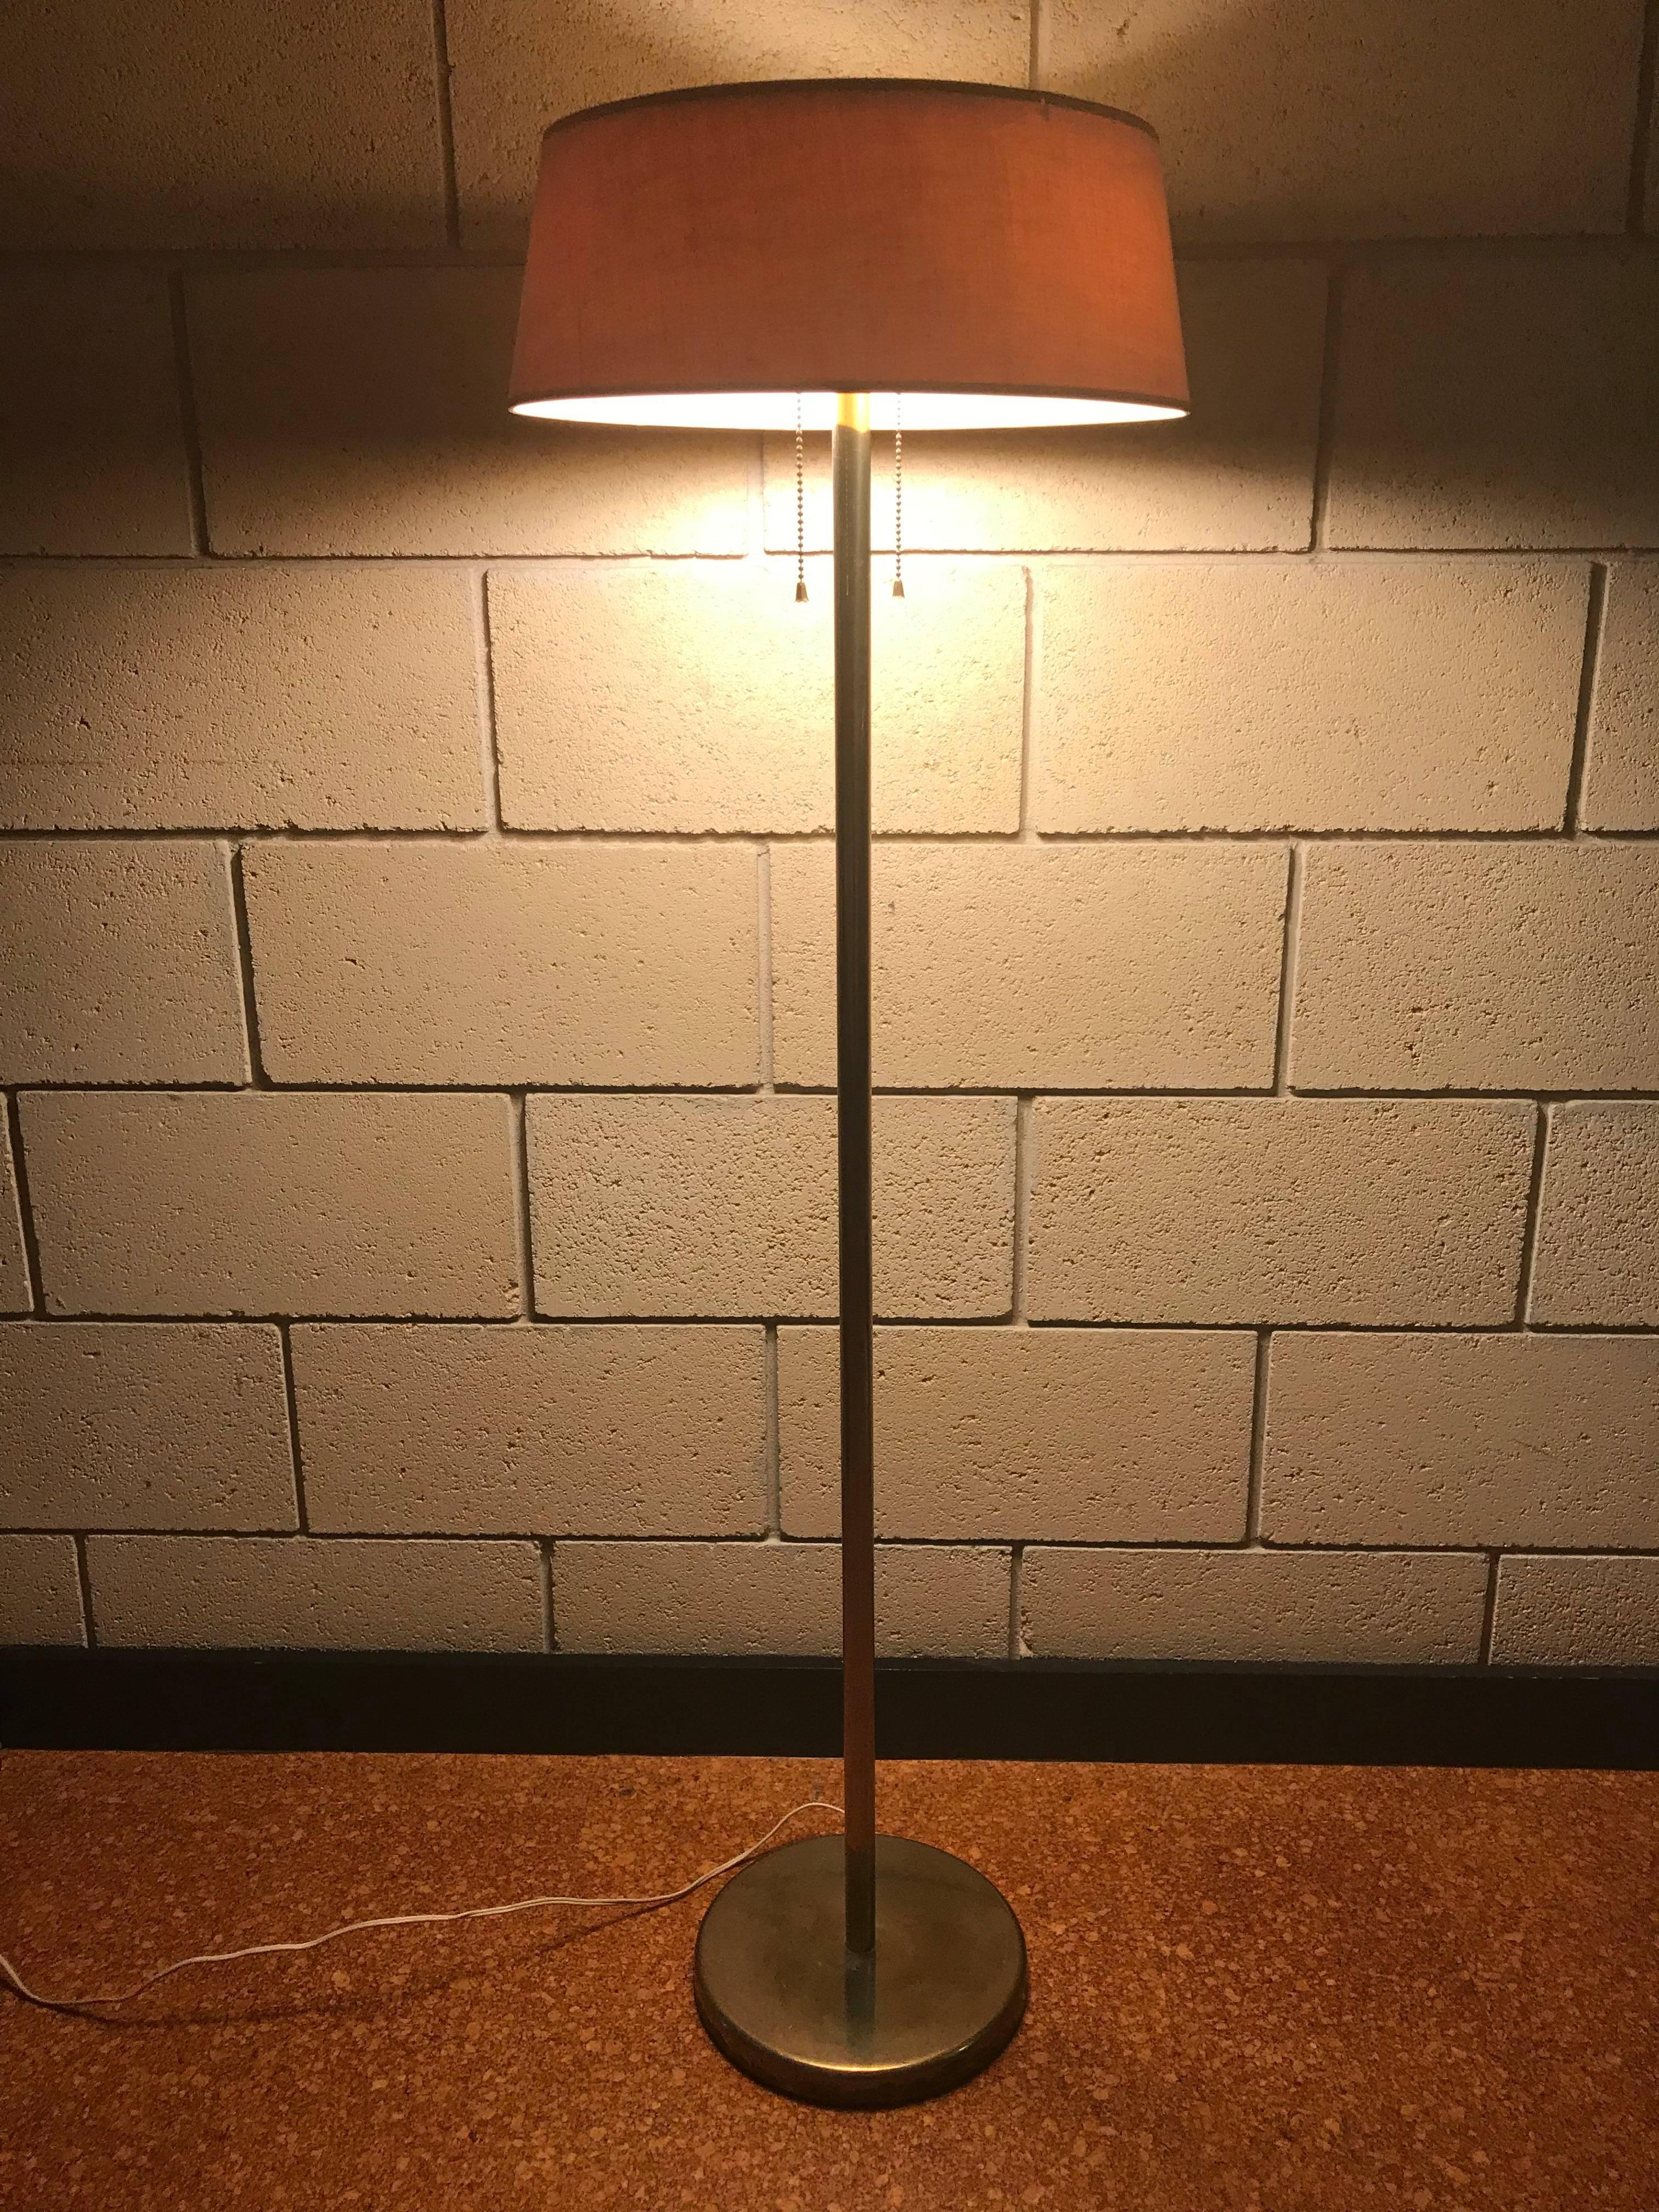 Nice original Minimalist floor lamp in brass by Walter Von Nessen for Nessen Studio. The shade, finial and top metal plate are original and only have very minor rubbing at the top rim of the shade. The brass 'stalk' of the lamp and the base have